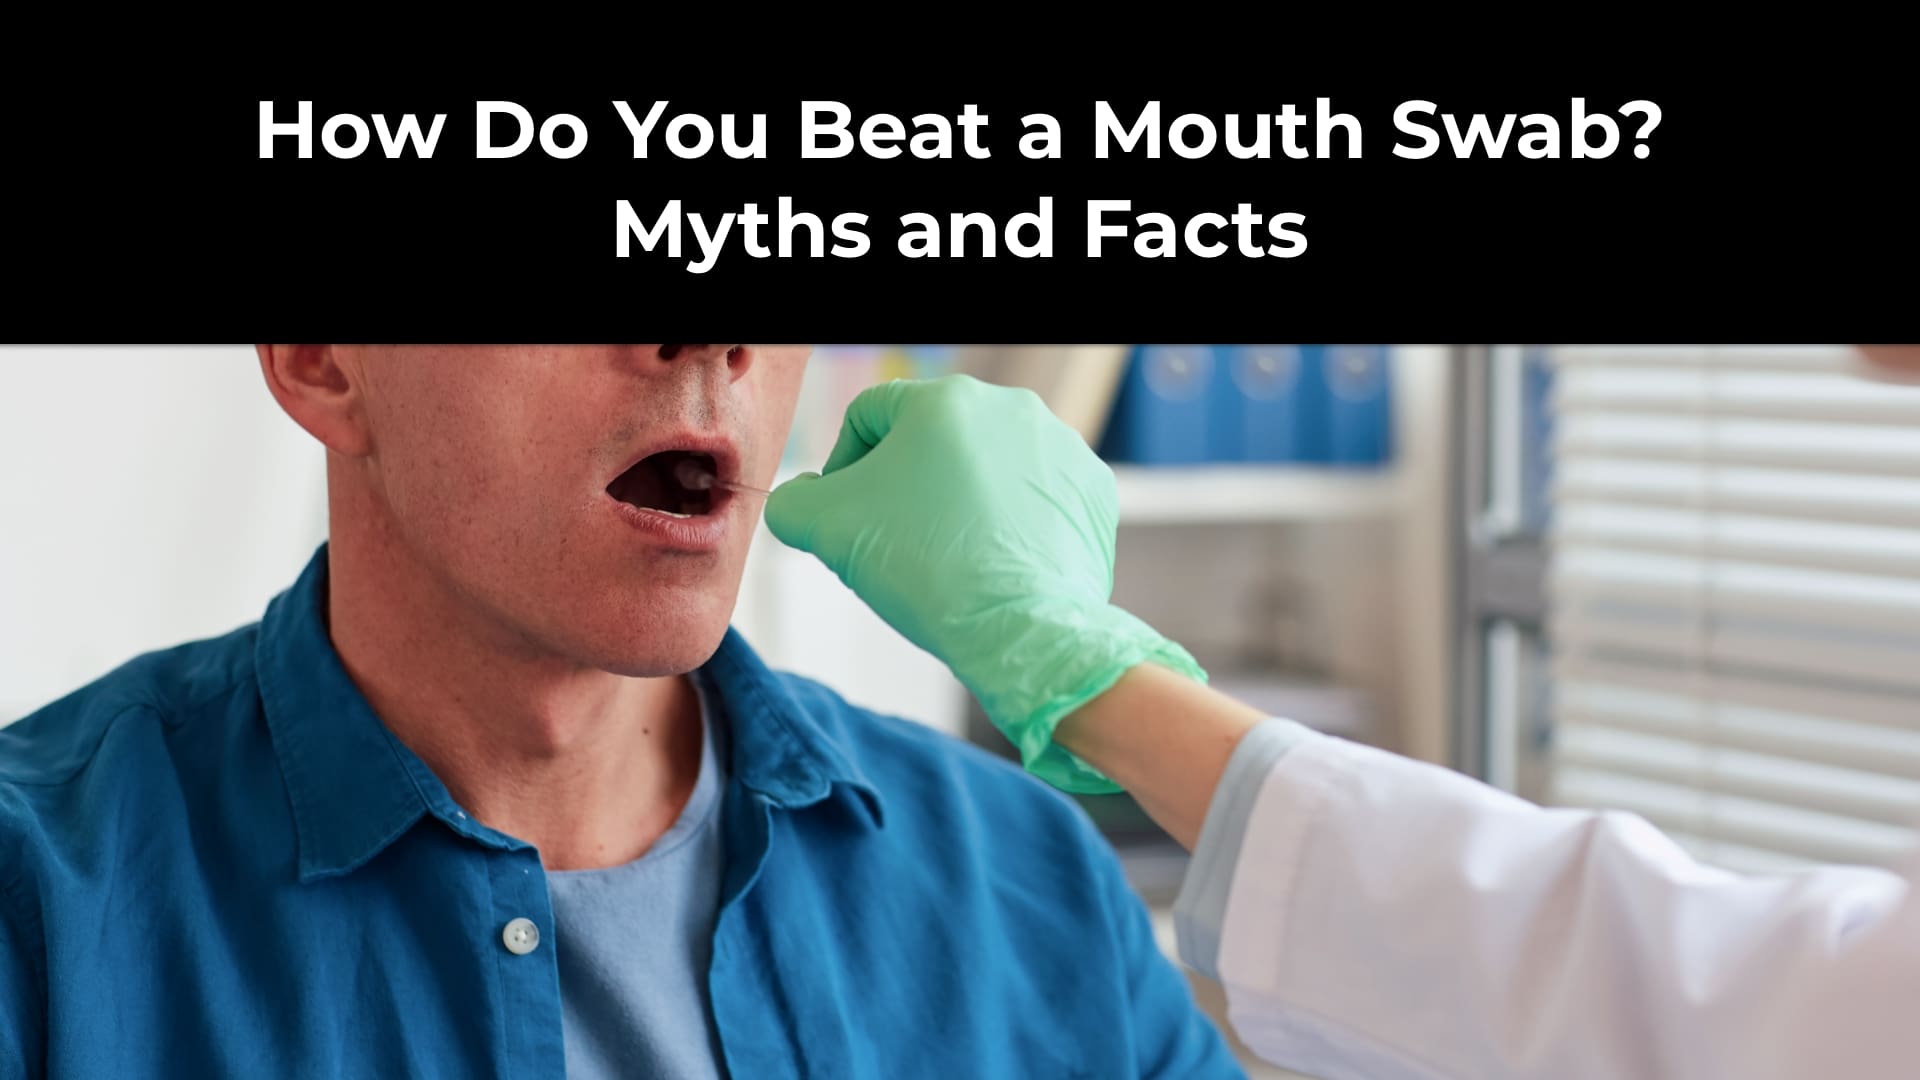 How Do You Beat a Mouth Swab? Myths and Facts